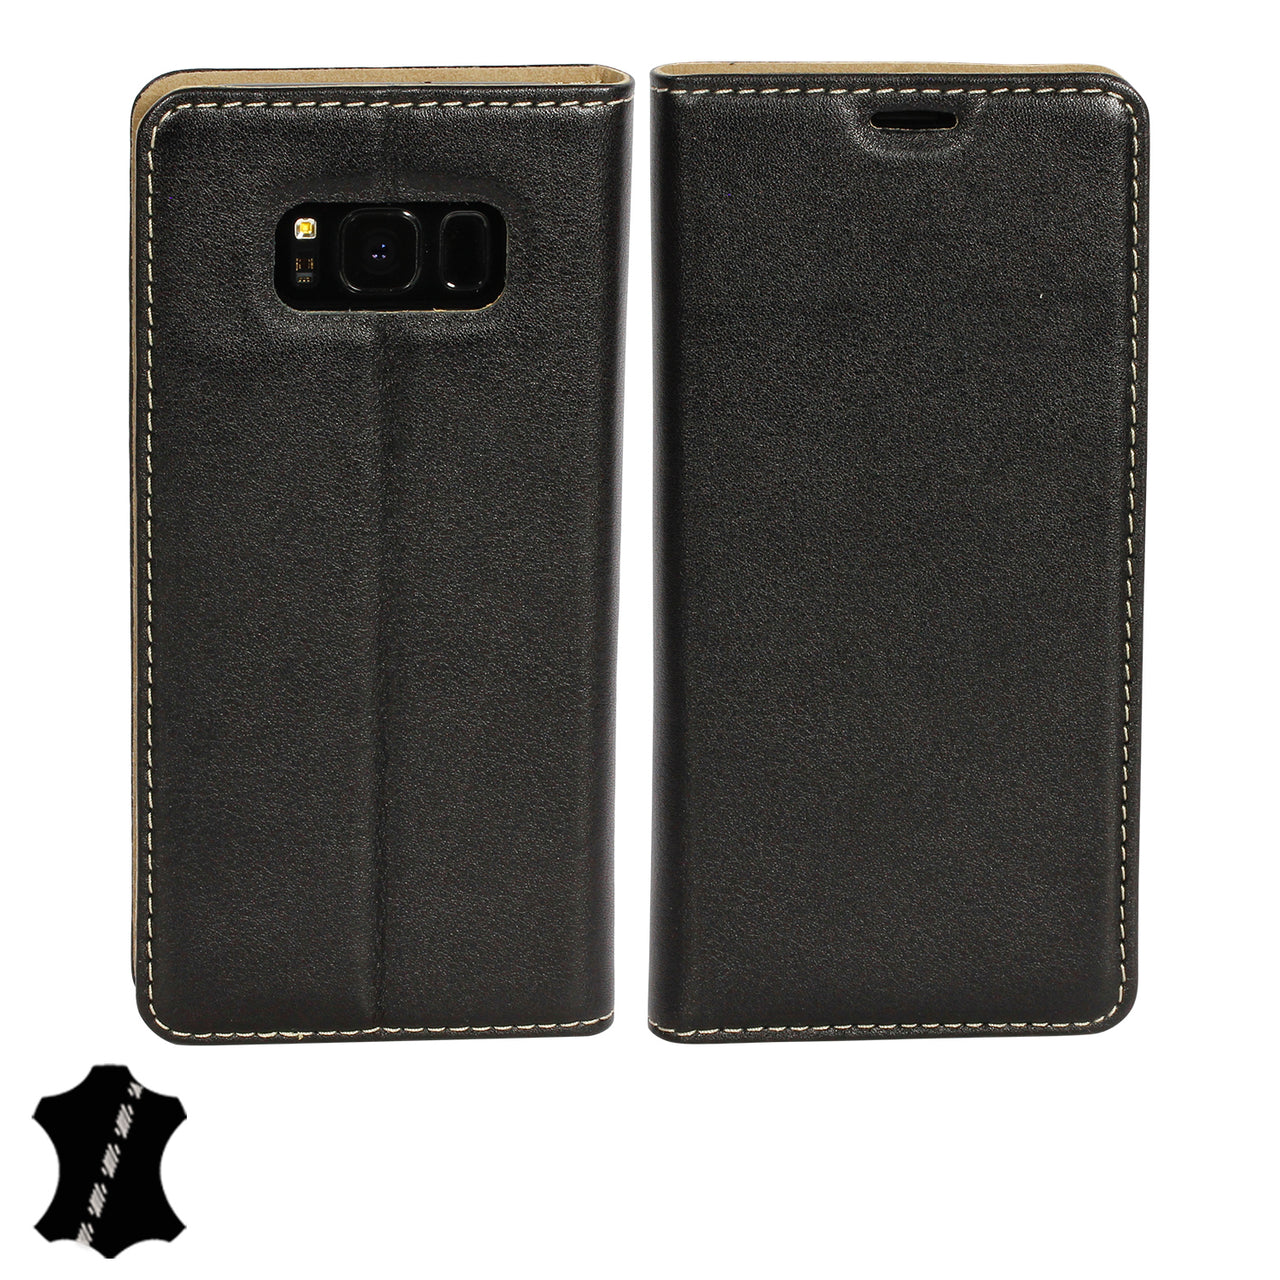 Samsung Galaxy S8 Genuine Leather Case with Stand | Artisancover